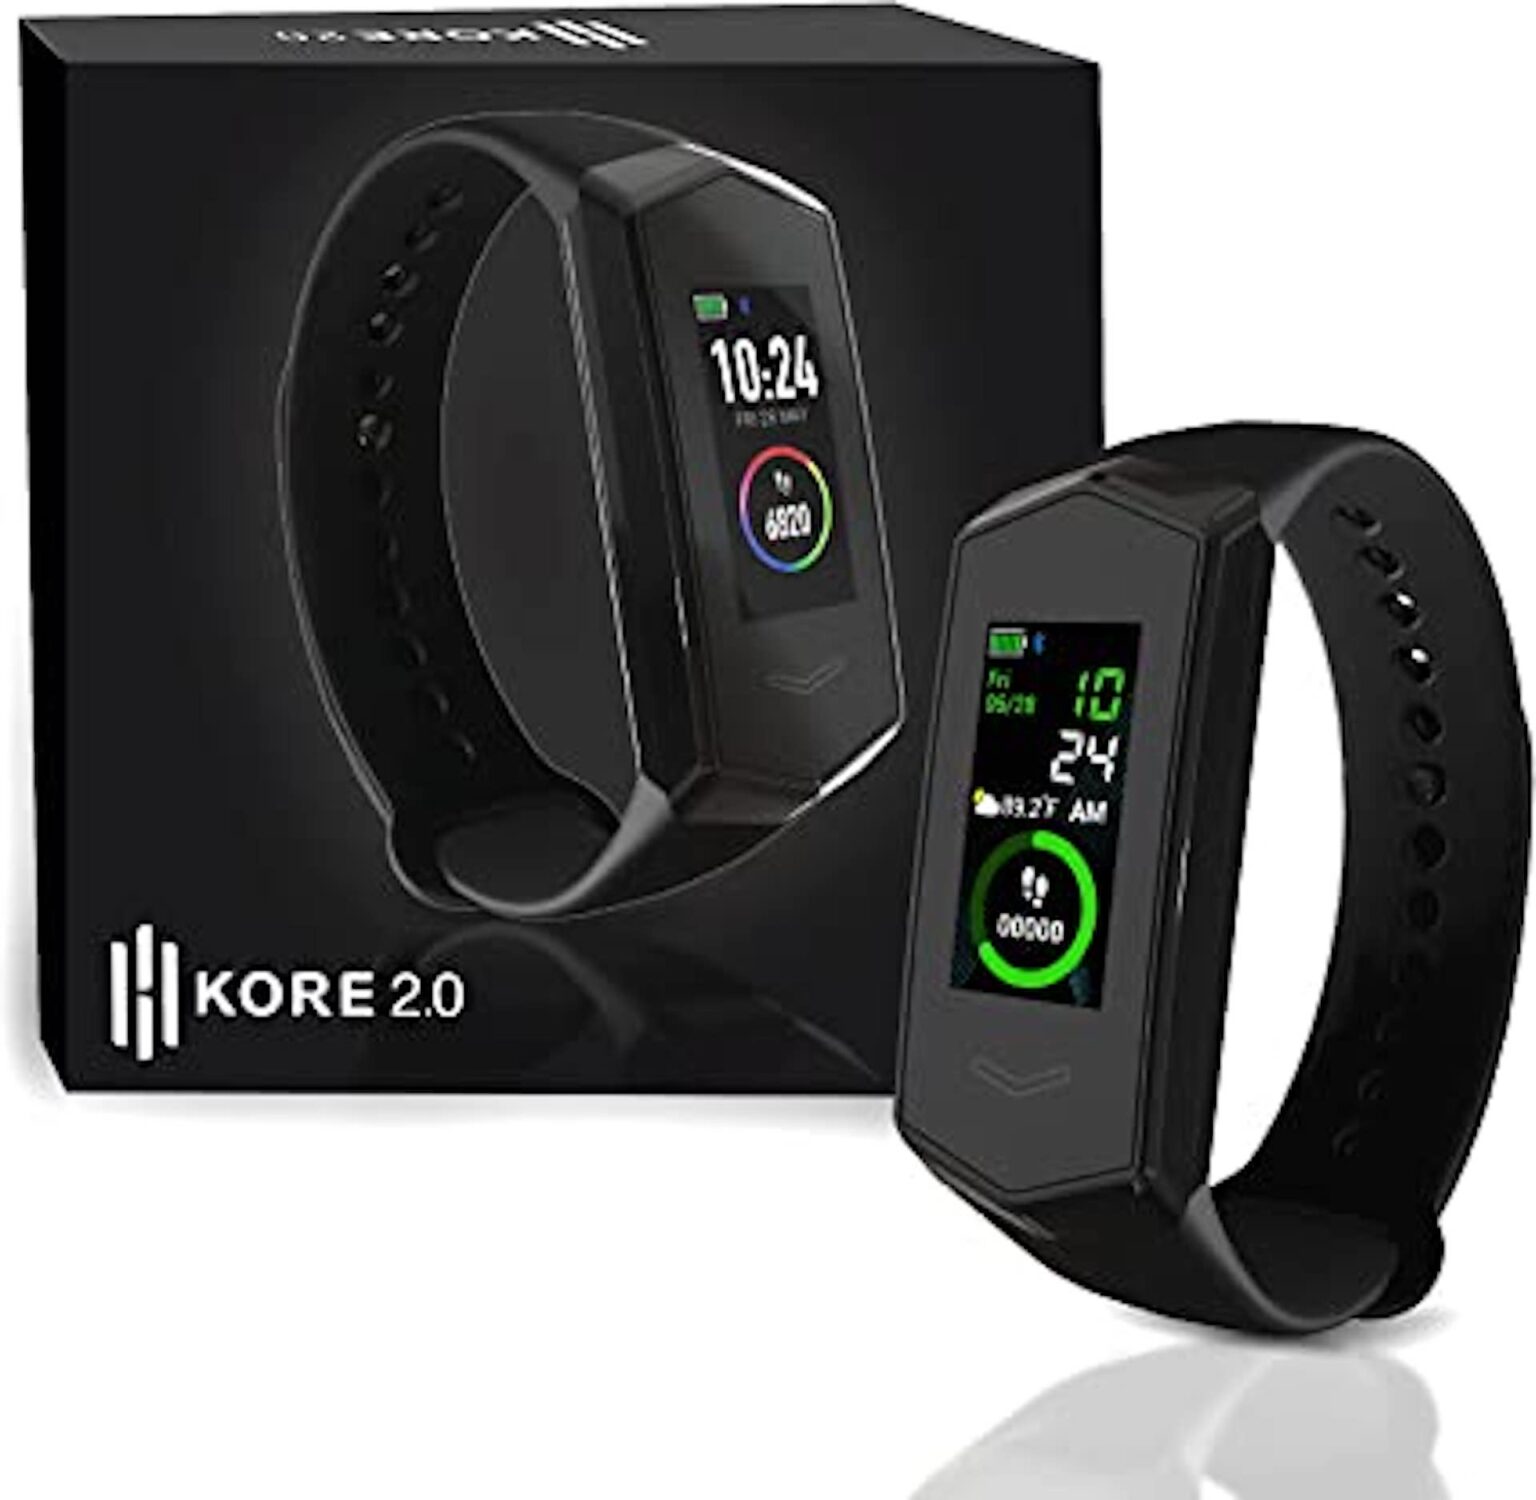 Who would have thought, a wristwatch would hold the potential to maintain good health. Here's an honest review of the fitness watch Kore 2.0.